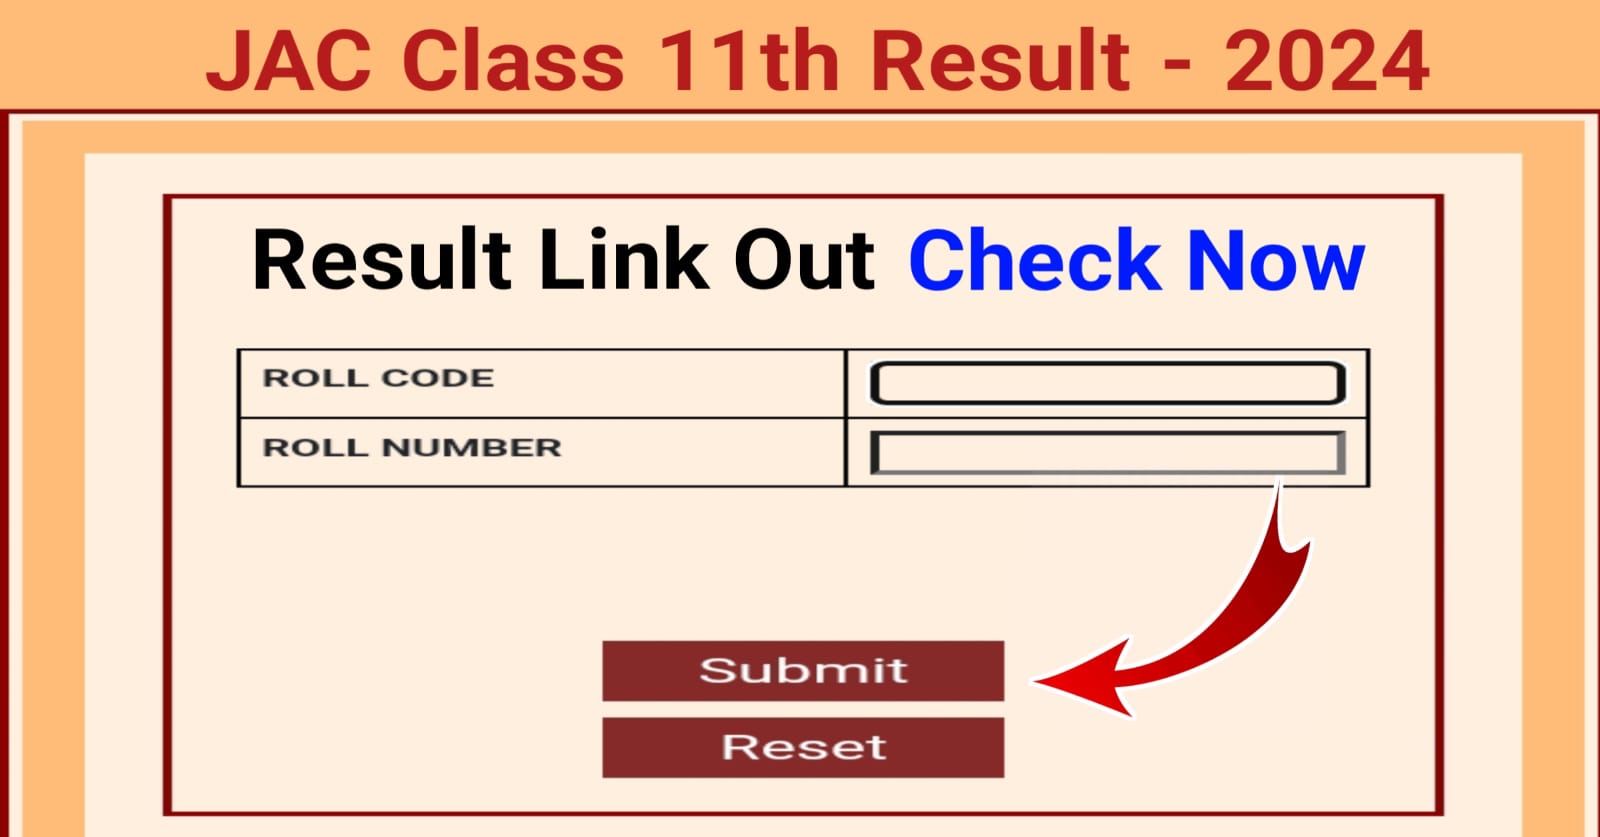 JAC Class 11th Result 2024 - Link Out (Check Now)